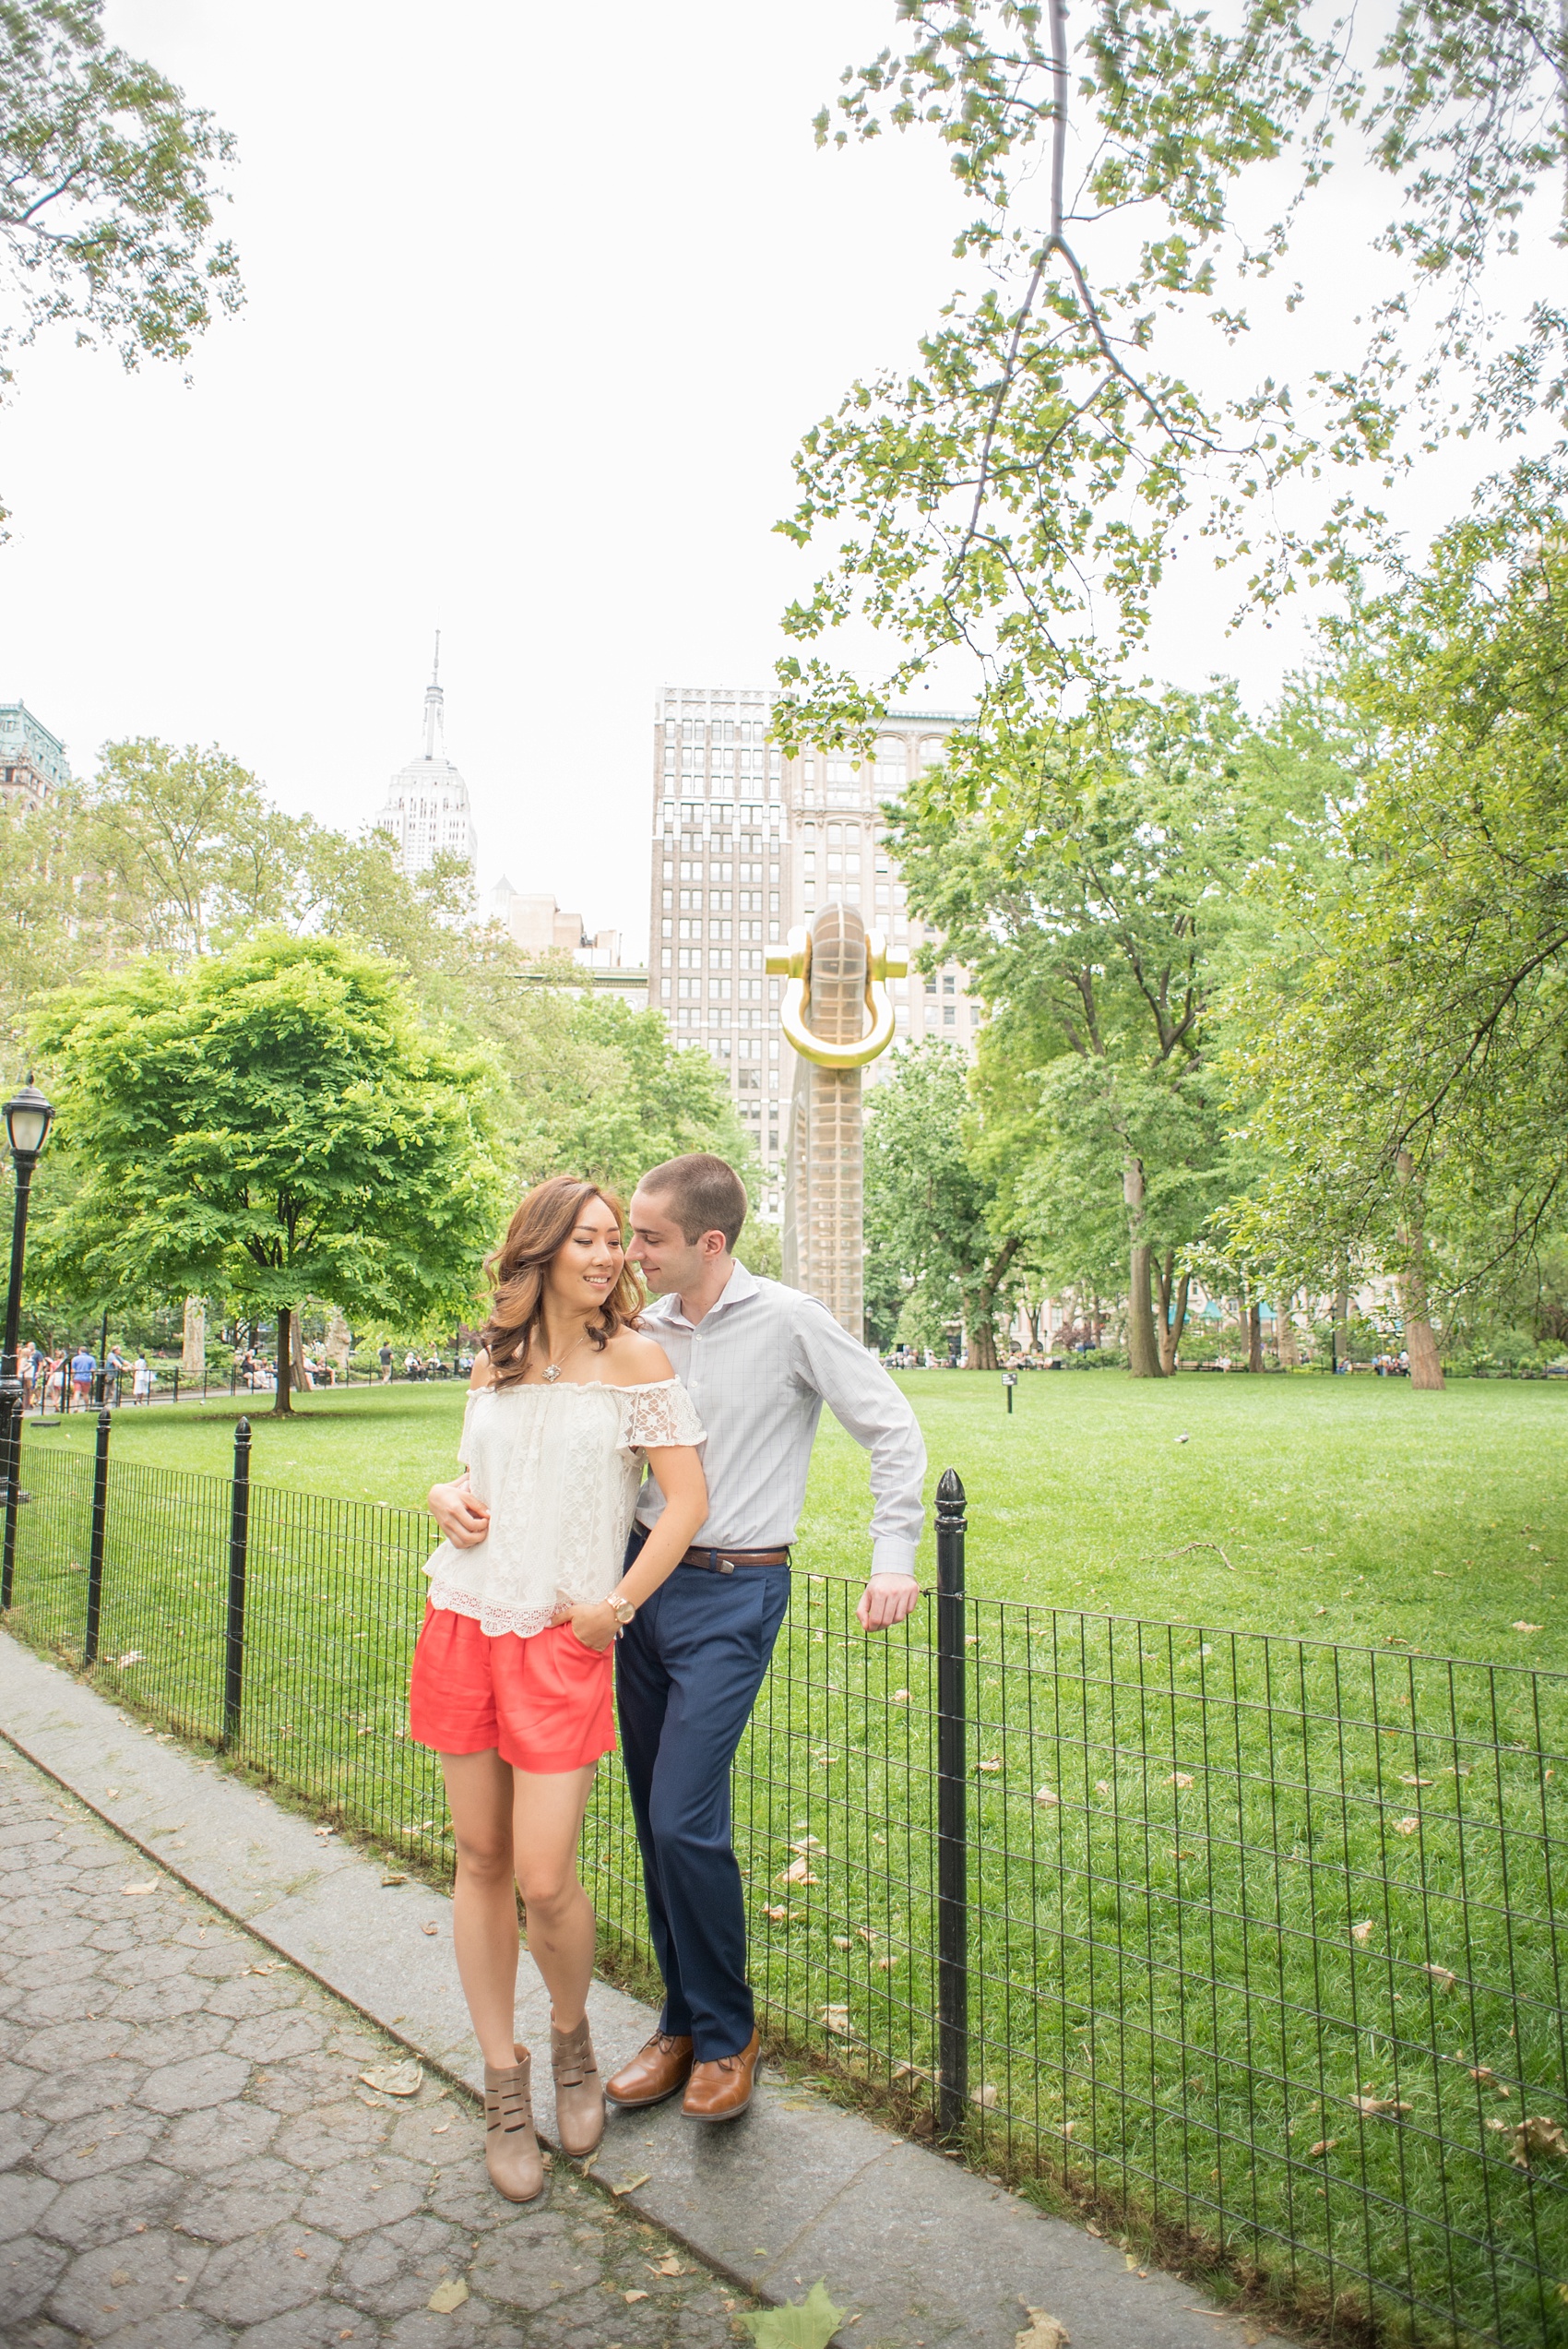 Mikkel Paige Photography photos of a Madison Square Park engagement session in NYC during spring. The bride and groom with the Empire State Building in the background. 